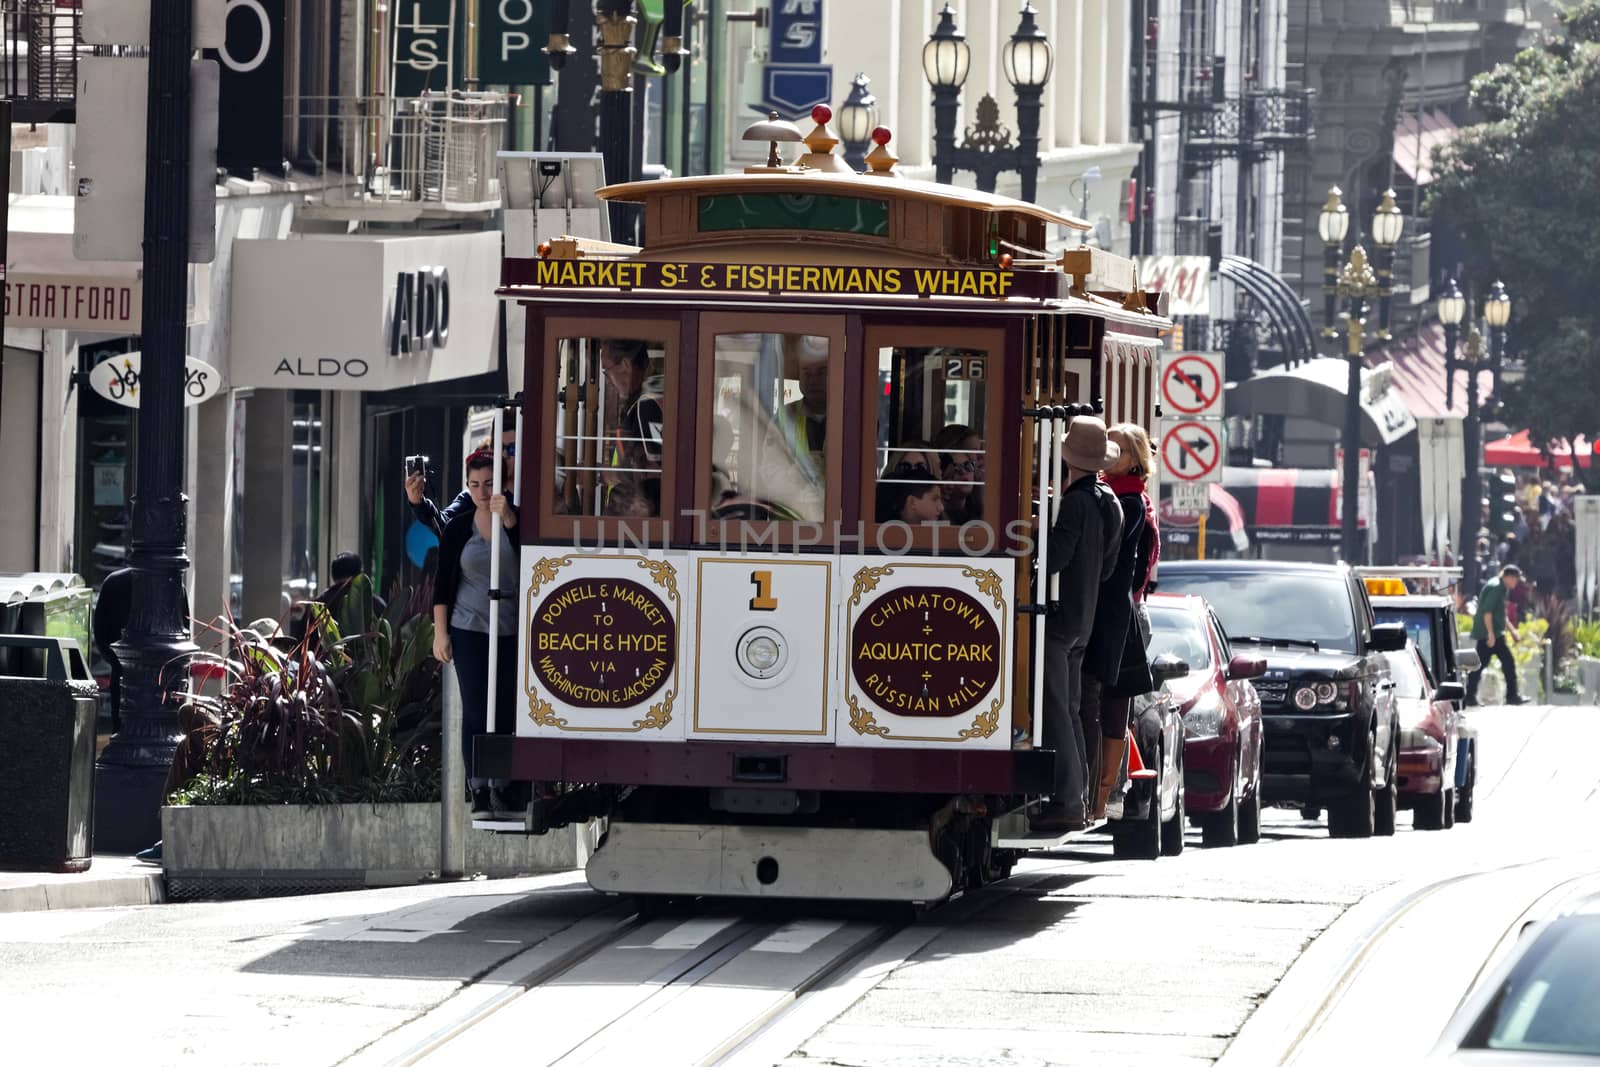 SAN FRANCISCO, USA - The Cable car tram by hanusst